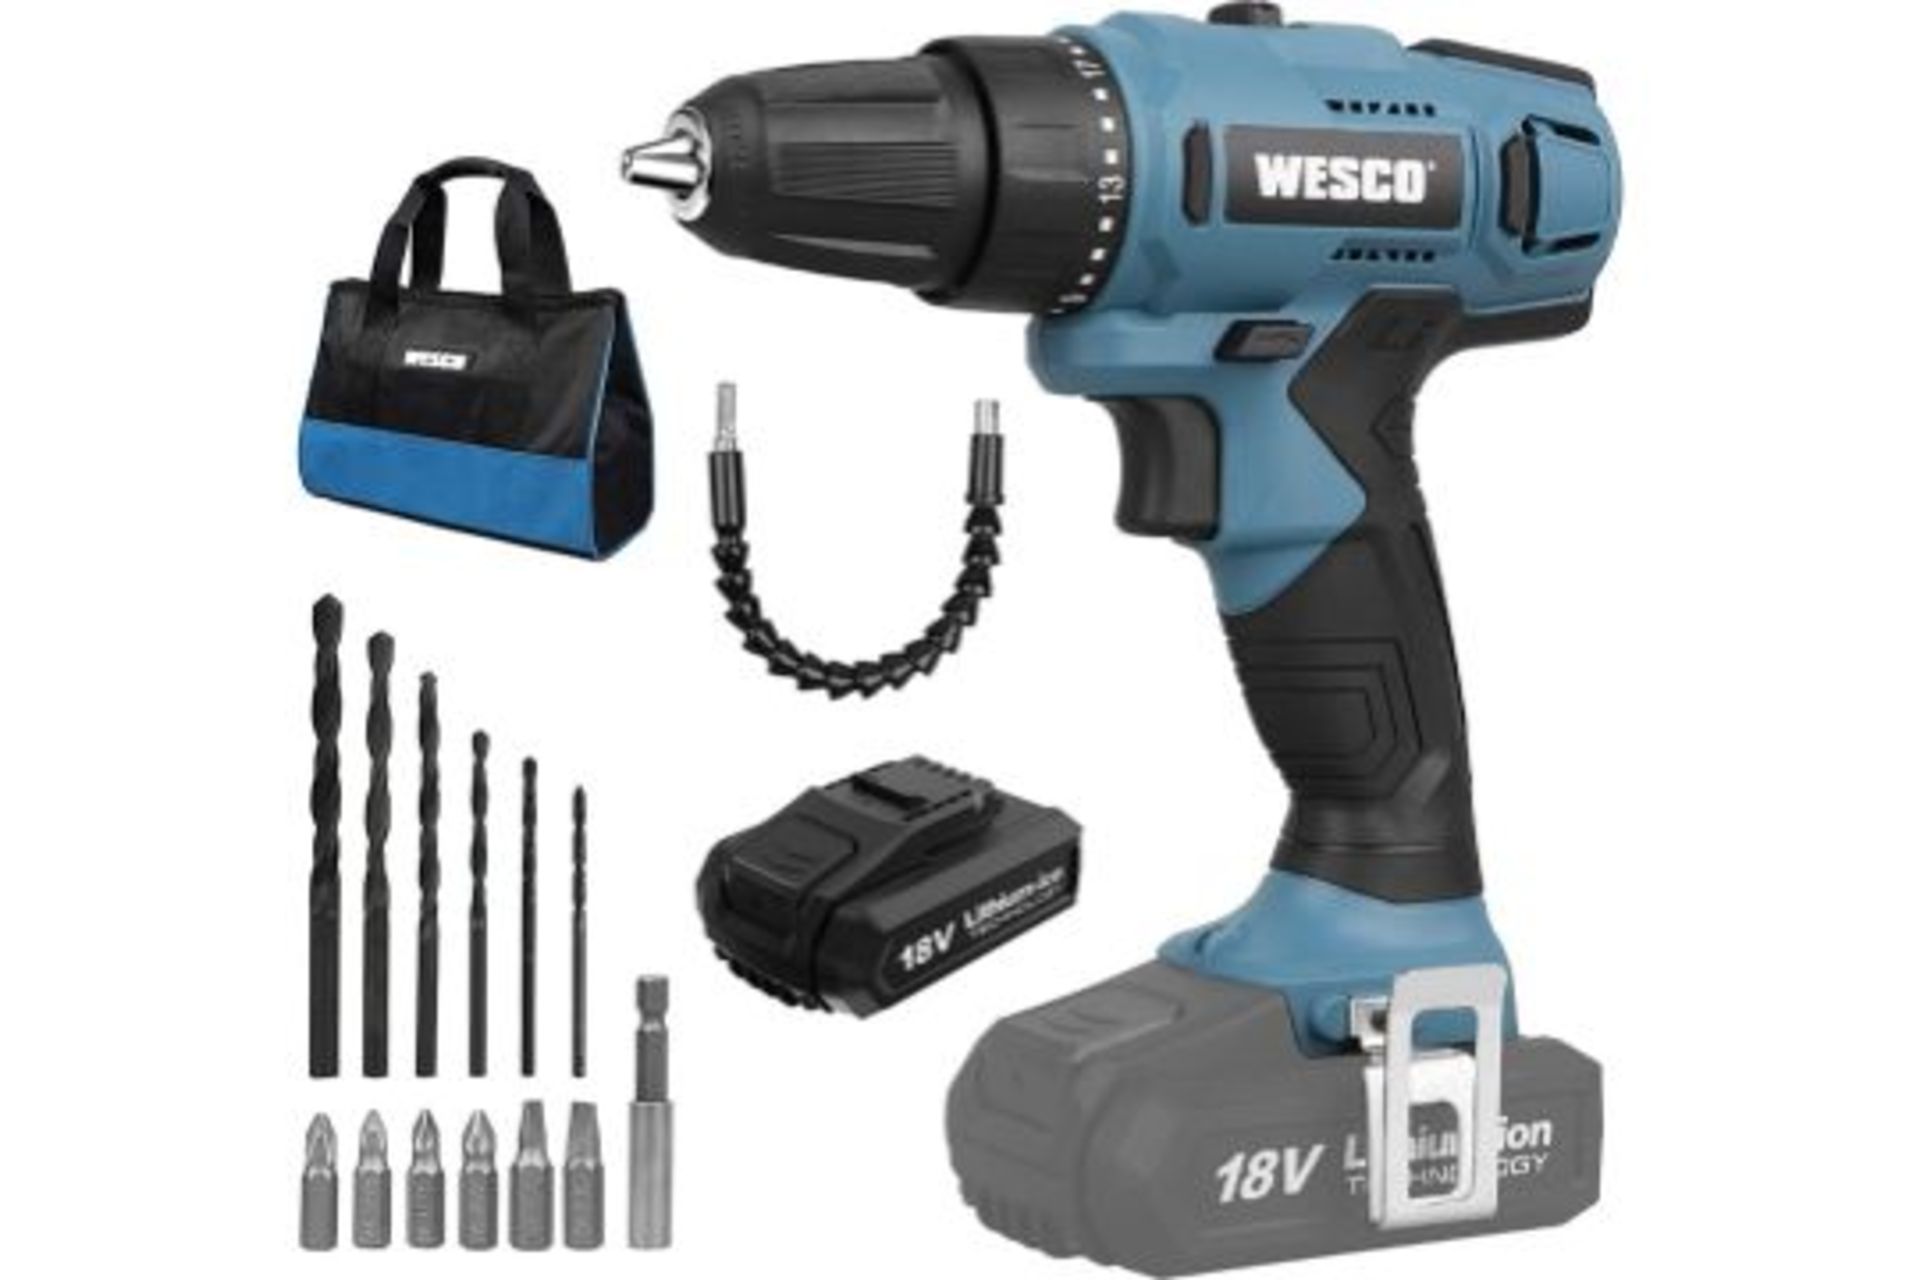 2 x New Boxed WESCO 18V 2.0Ah Power Combi Drill Kit with Li-ion Battery and Charger, Electric